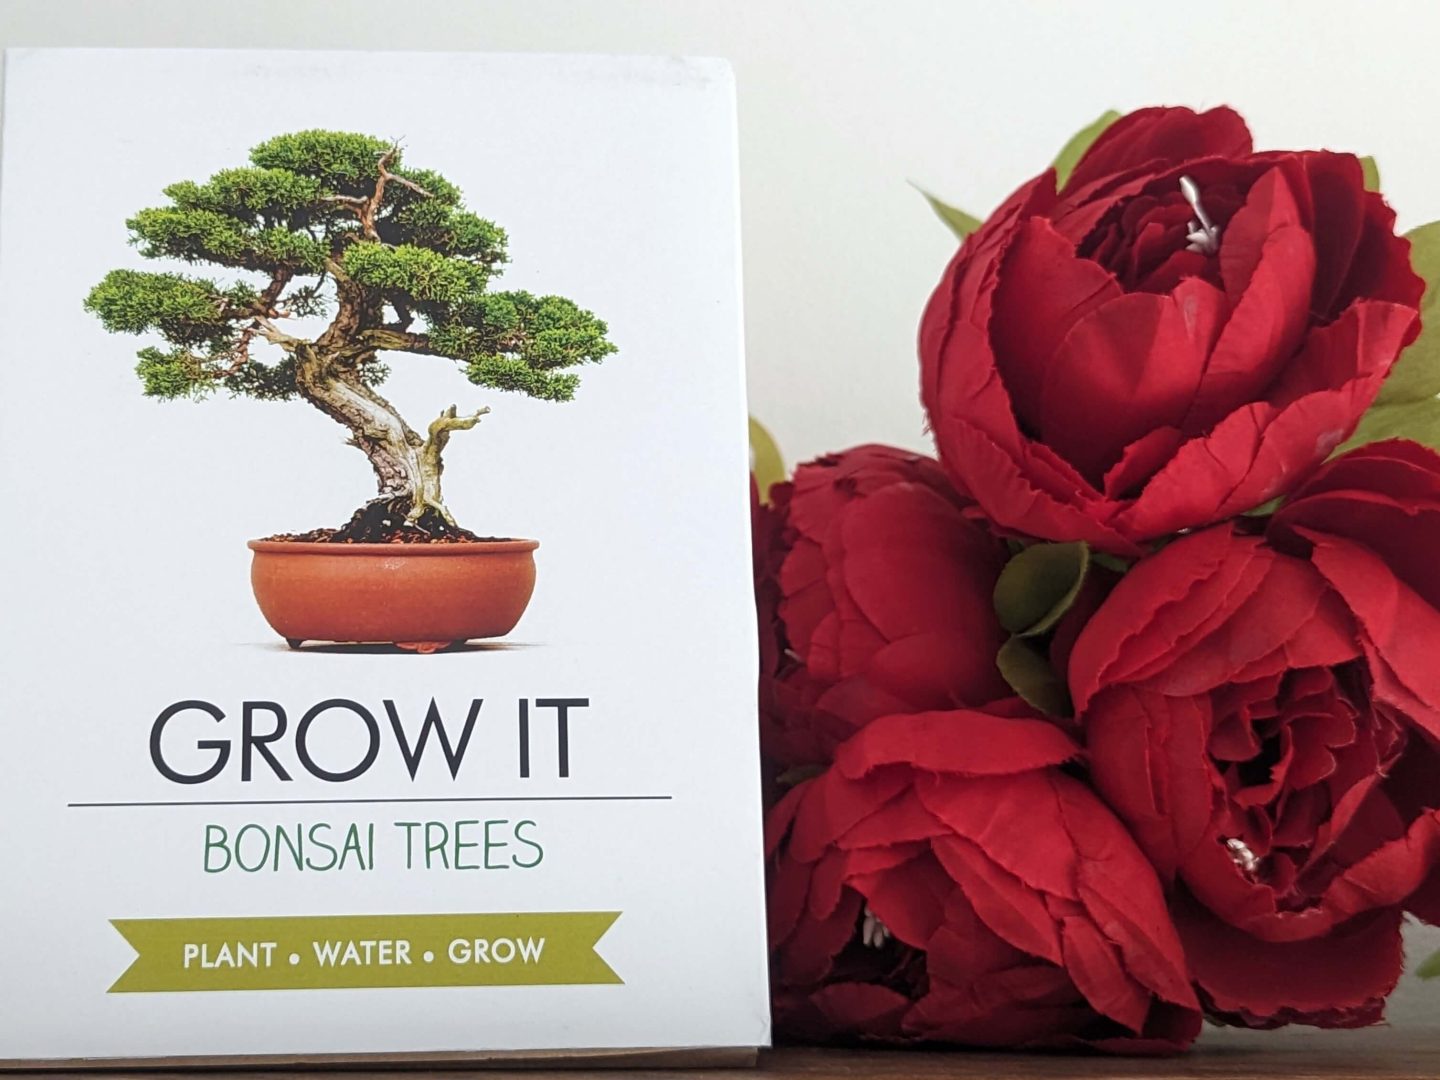 Grow It Bonsai Tree Kit in a white box displayed beside red flowers next to a white wall